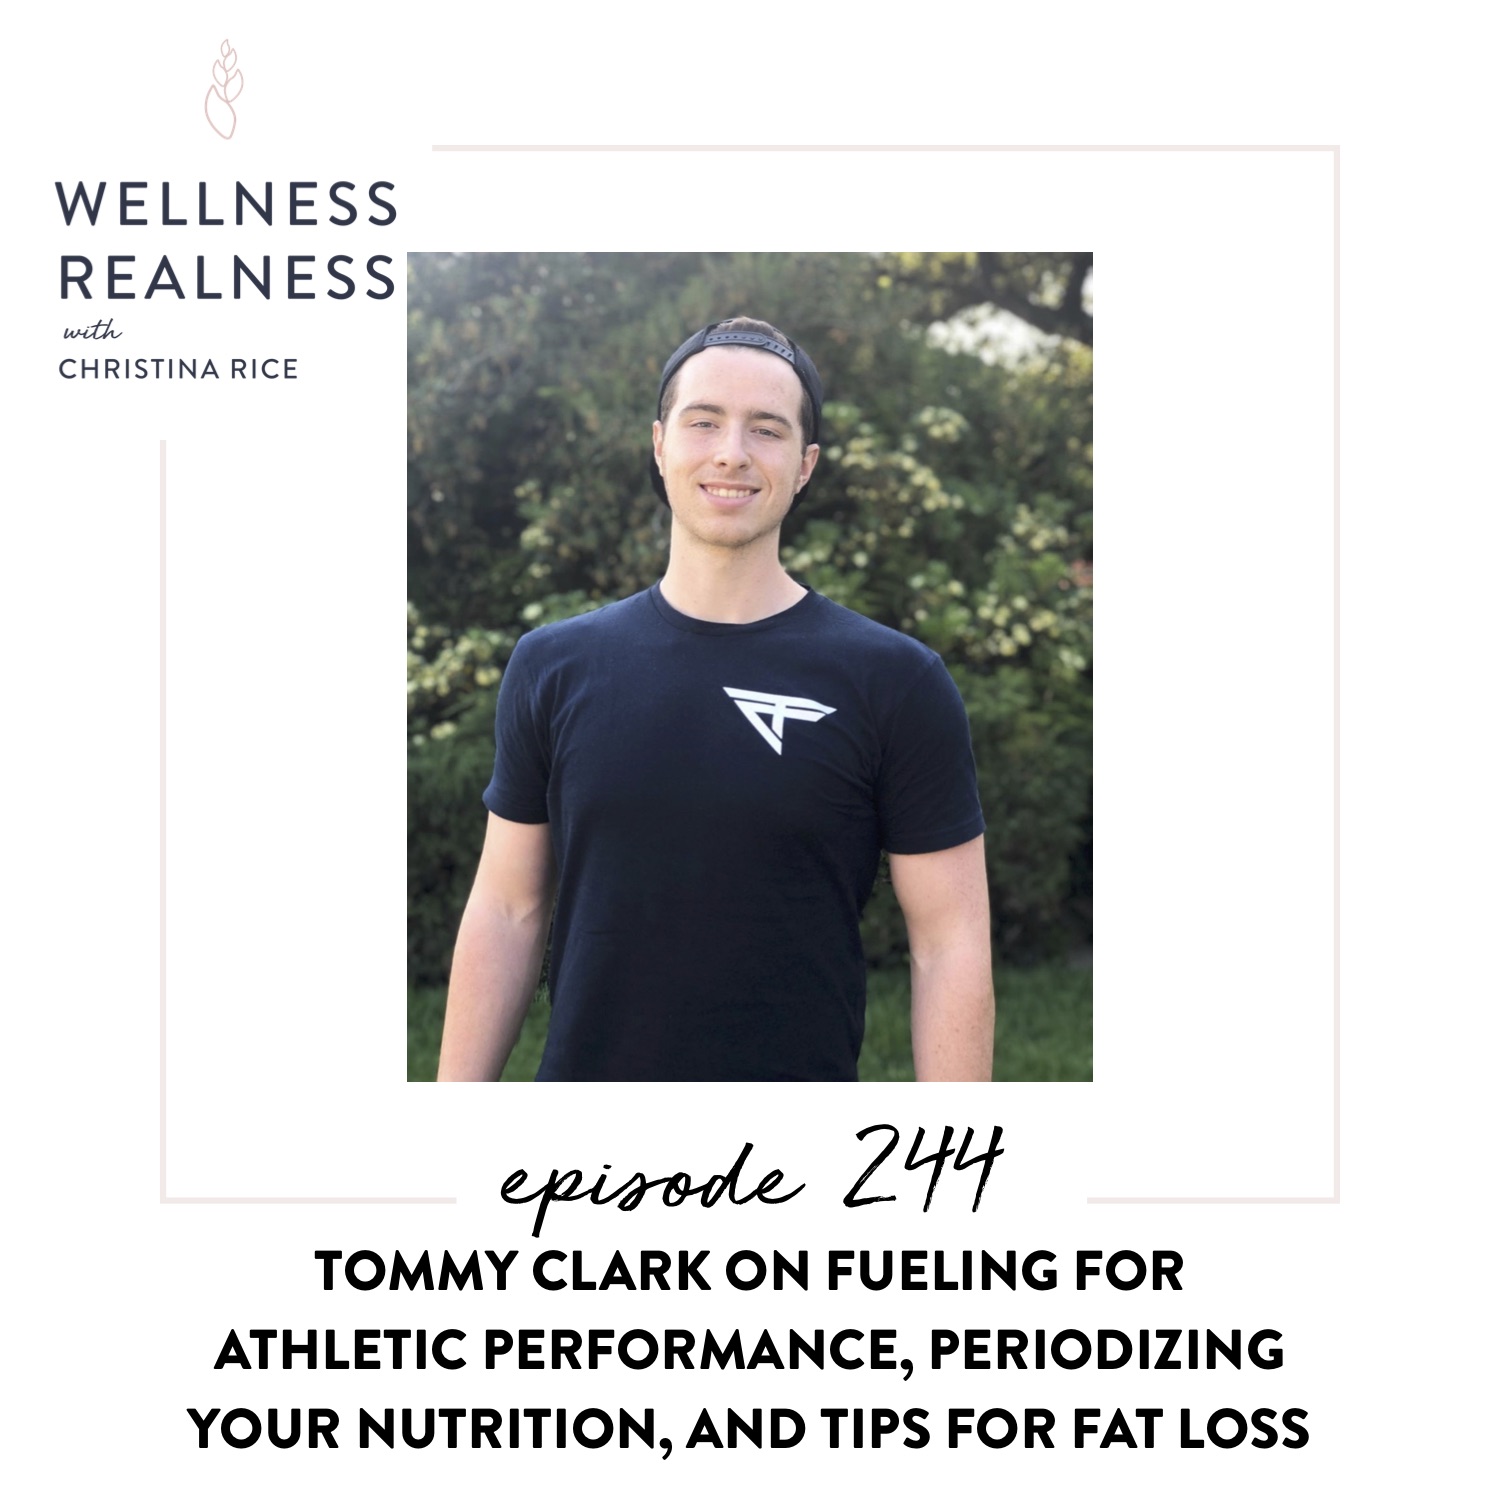 244: Tommy Clark on Fueling for Athletic Performance, Periodizing Your Nutrition, and Tips for Fat Loss